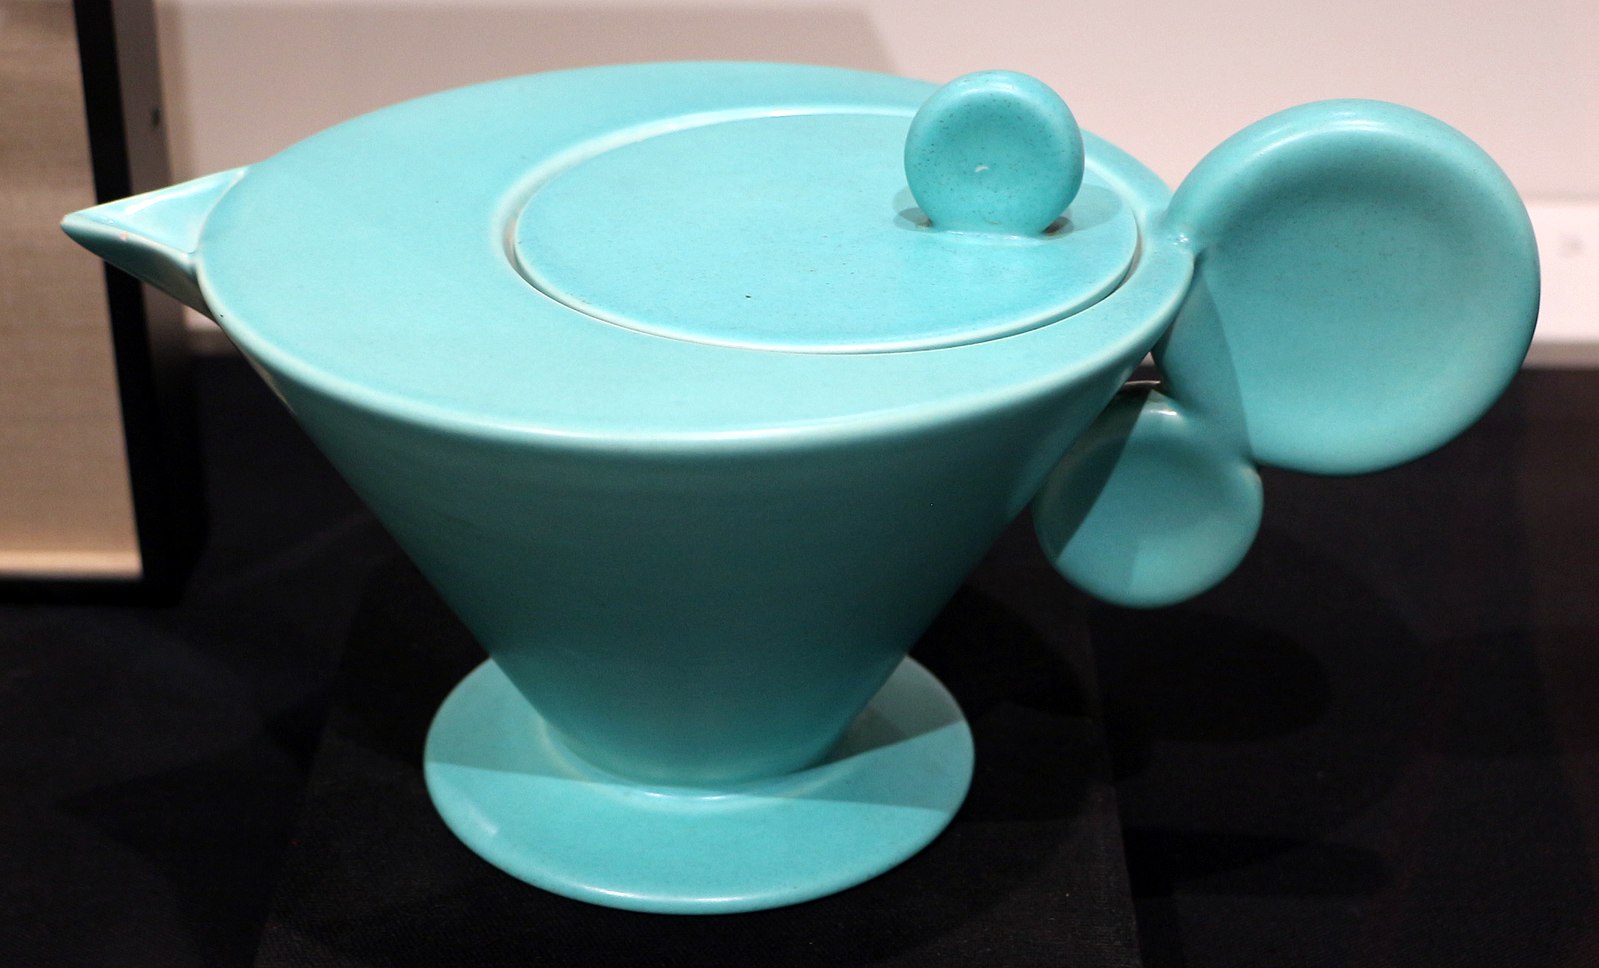 A blue colored teapot made of clay